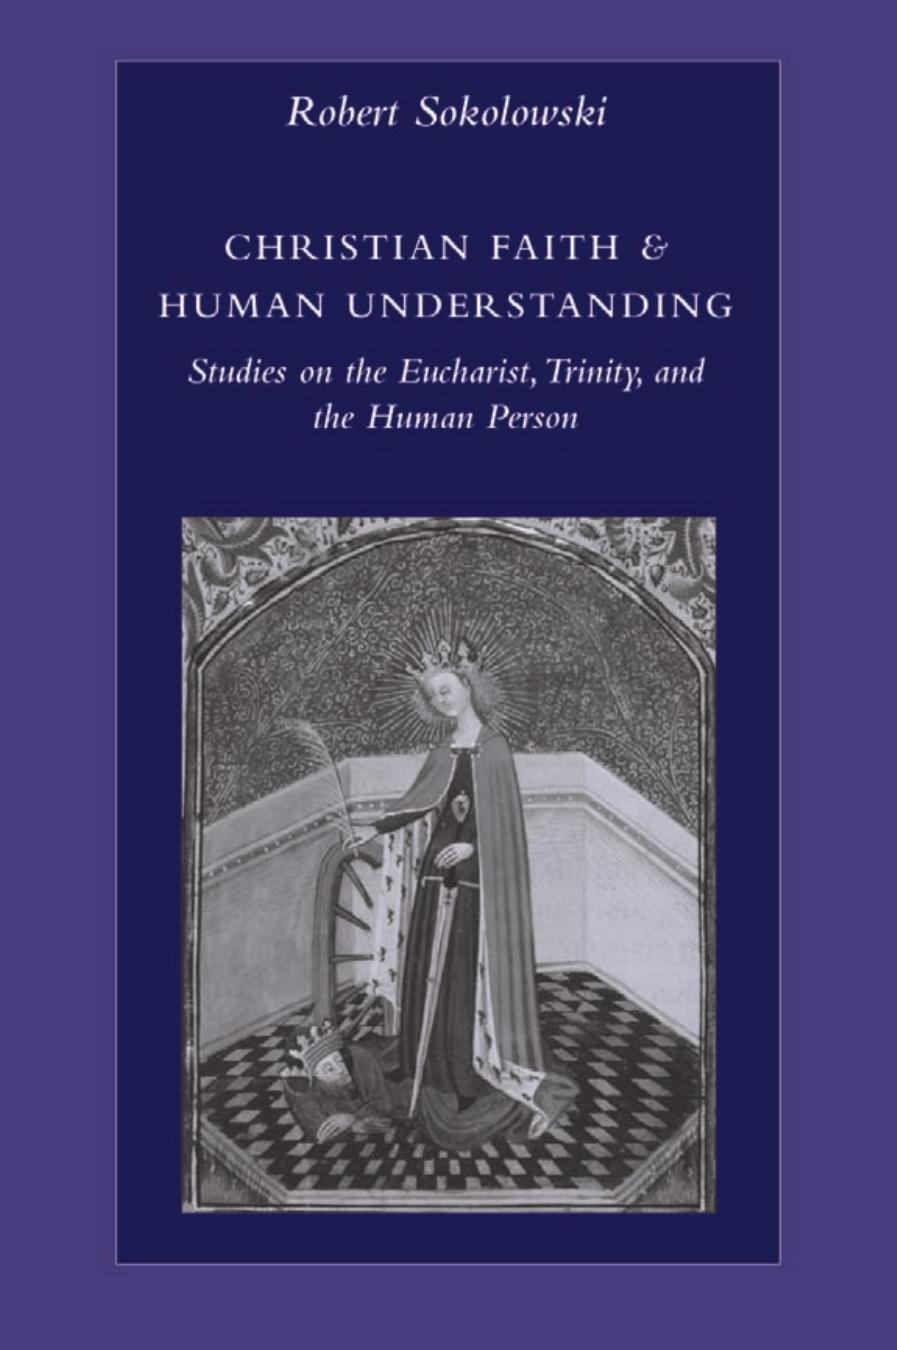 Christian Faith and Human Understanding Studies on the Eucharist, Trinity, and the Human Person 2006